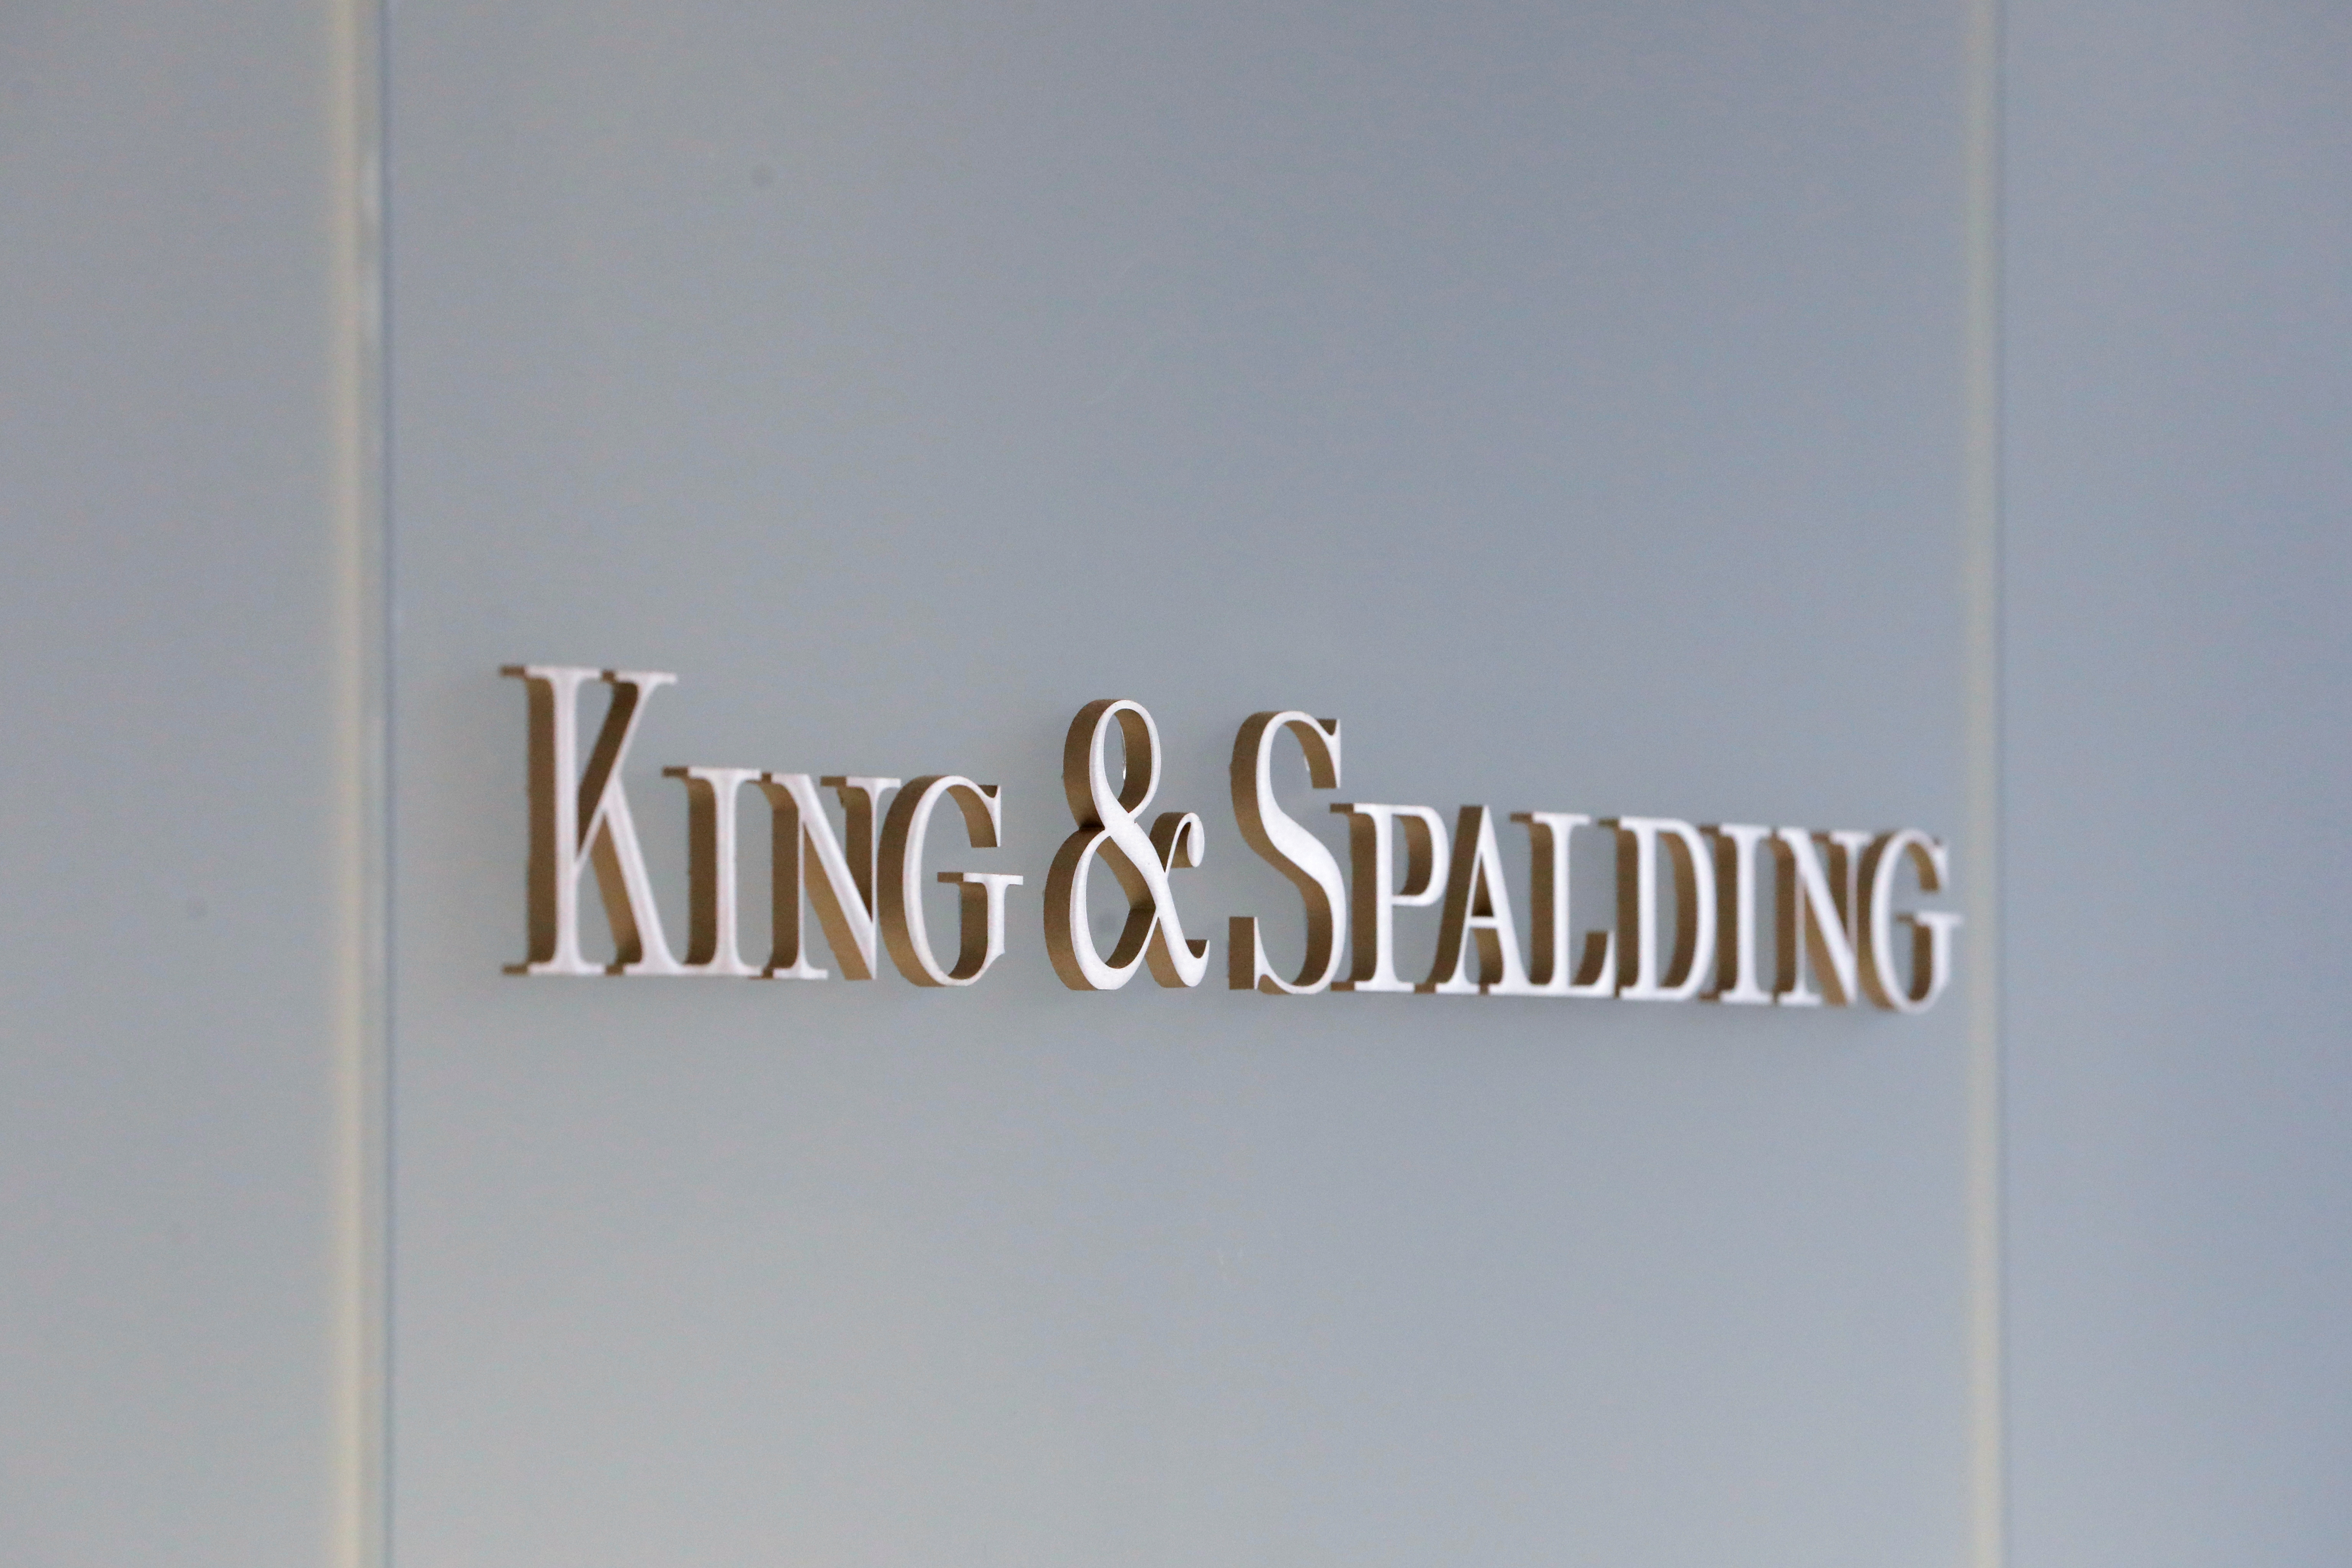 The company logo of the law firm King & Spalding is seen in their legal offices in Manhattan, New York City, New York